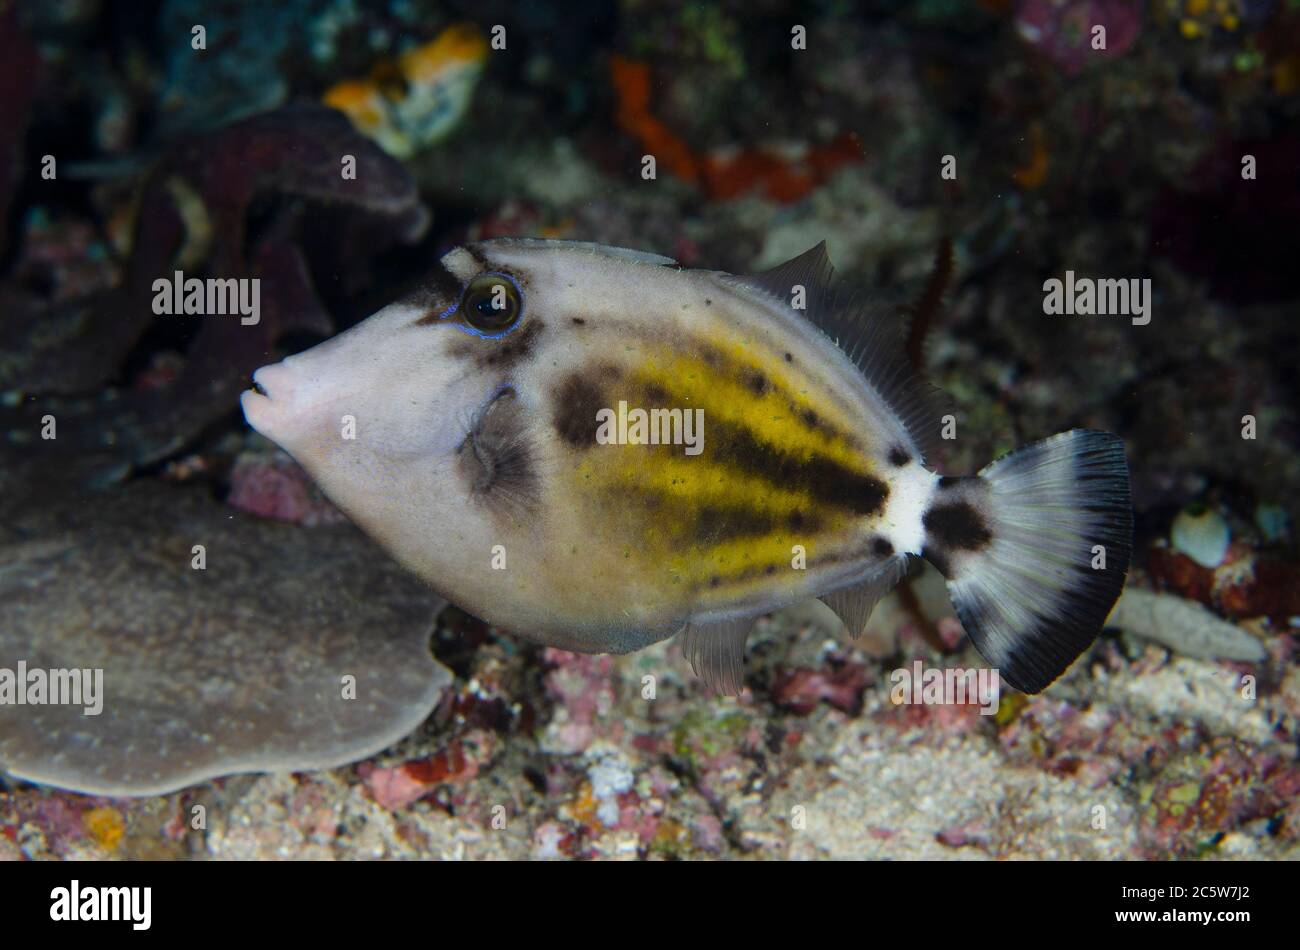 Spectacled Filefish, Cantherhines frontincinctus, night dive, Murex House Reef dive site, Bangka Island, north Sulawesi, Indonesia, Pacific Ocean Stock Photo